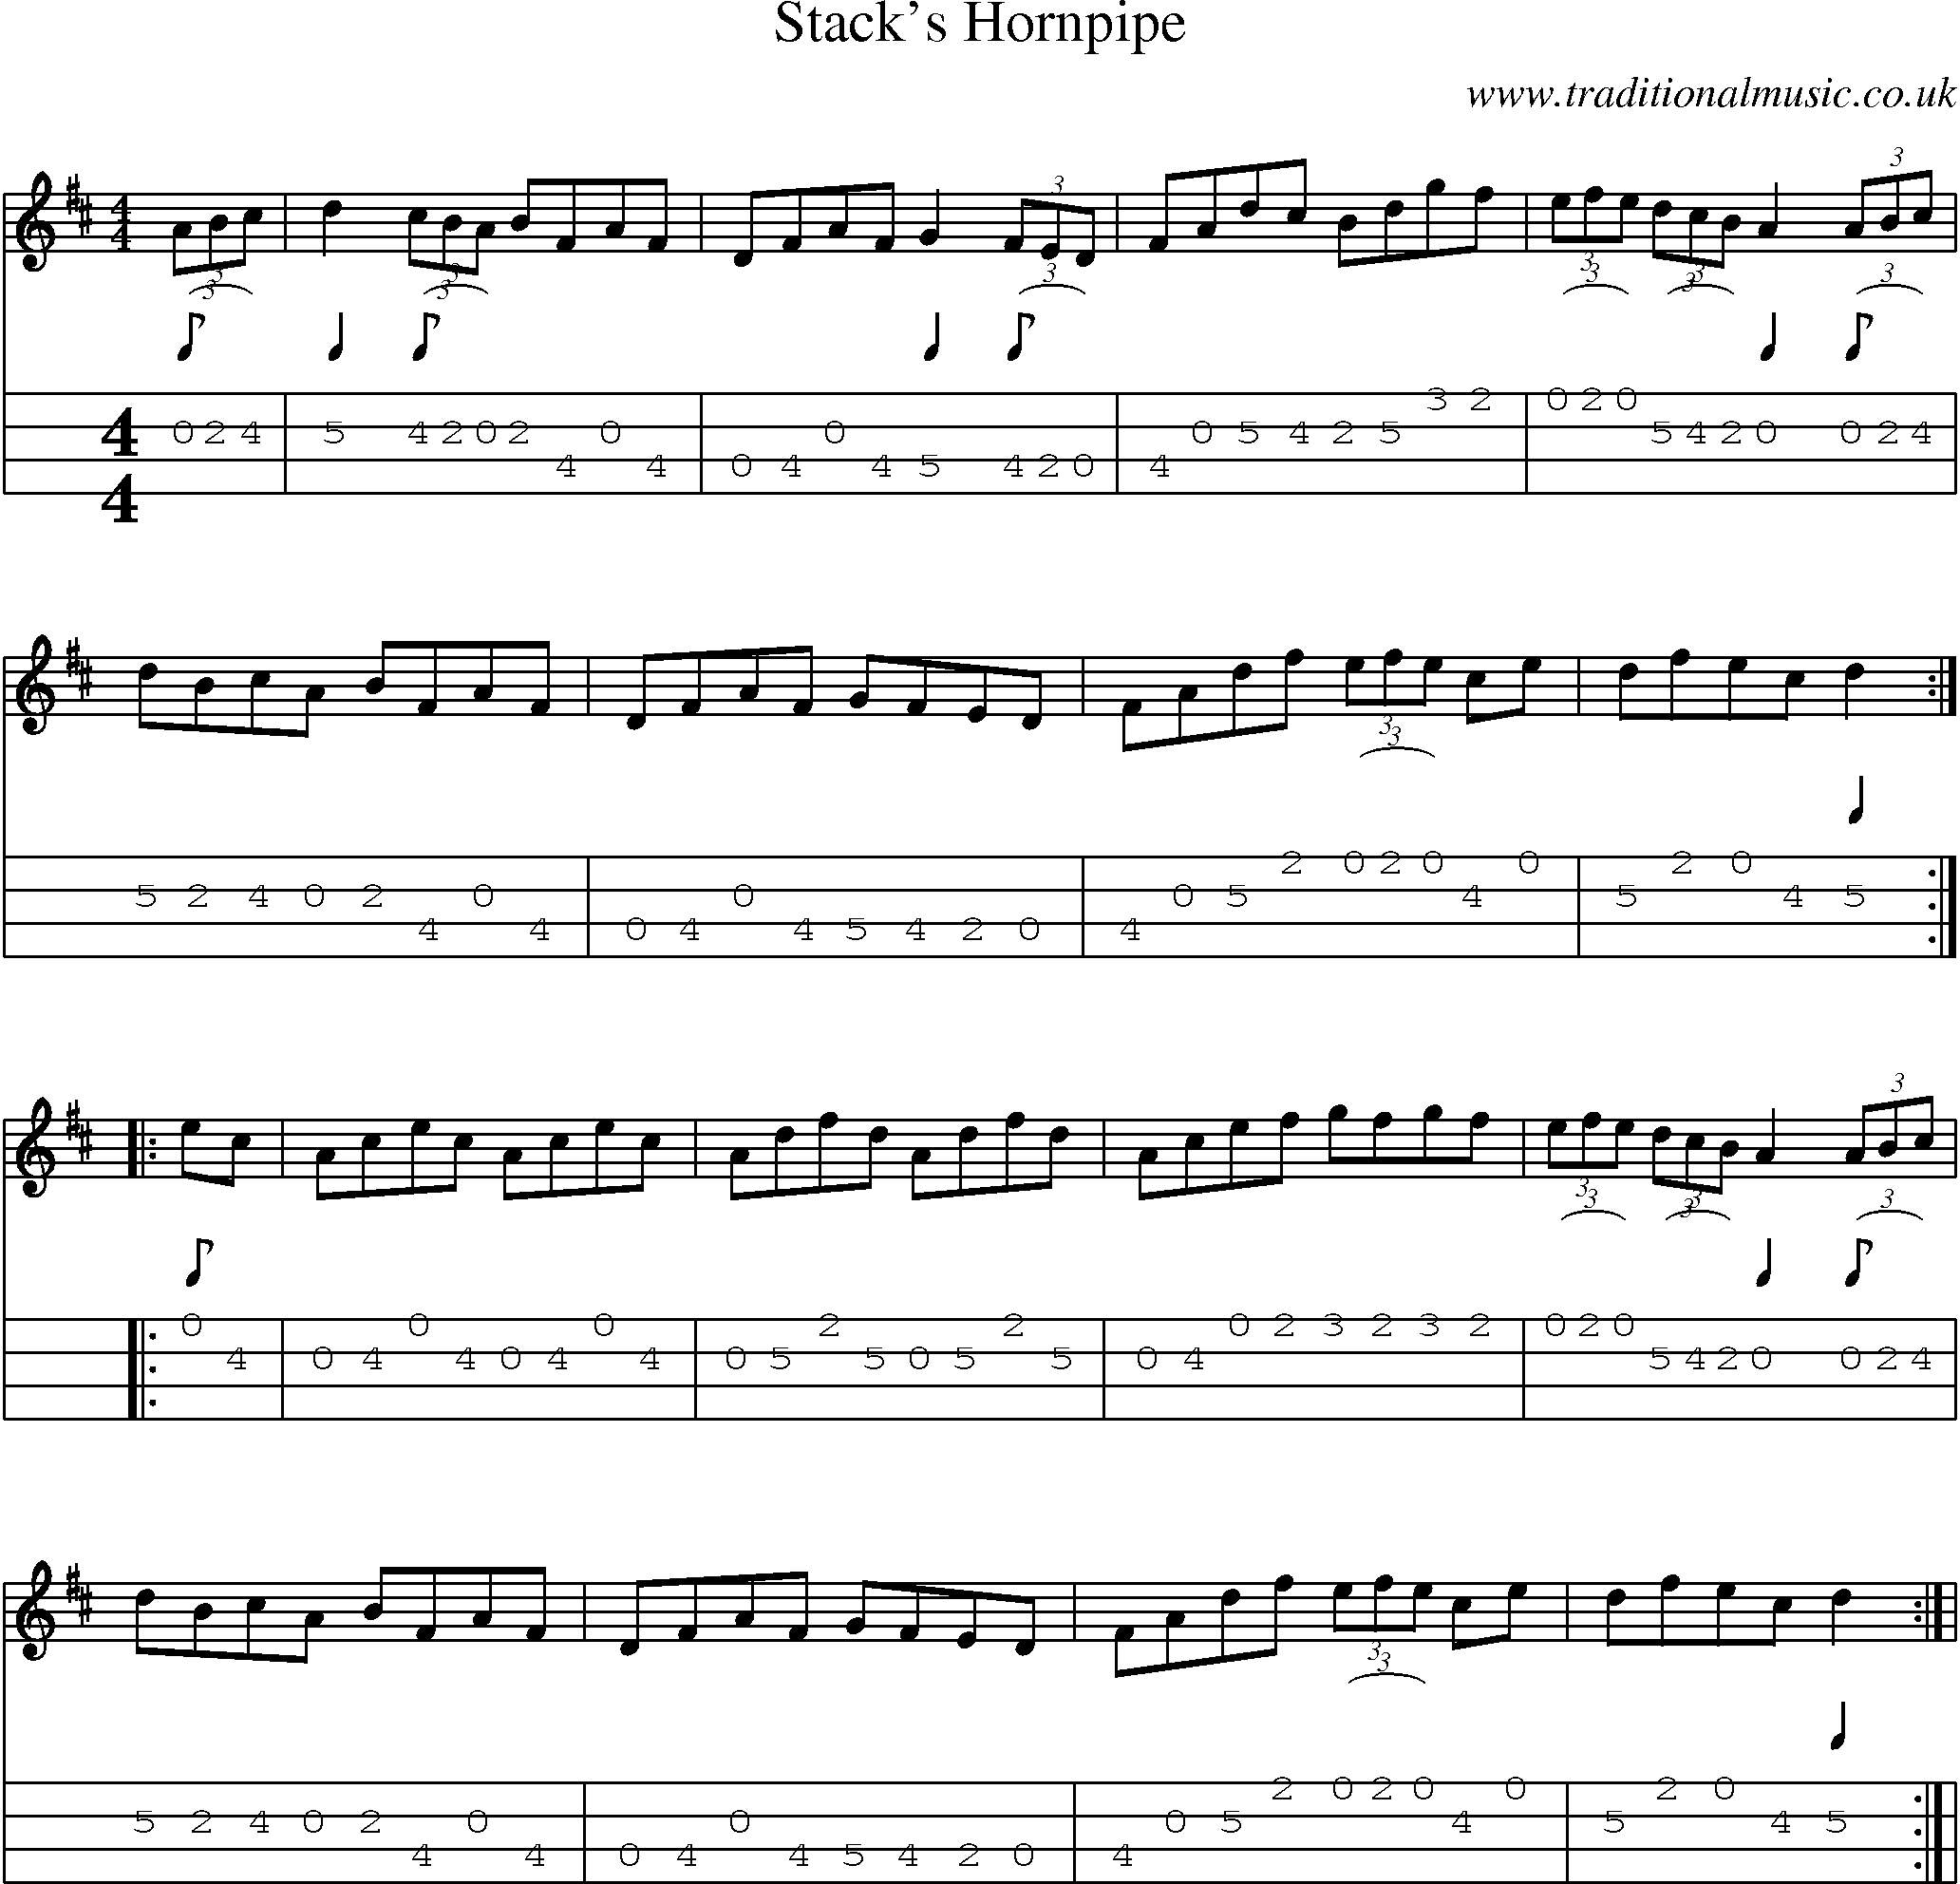 Music Score and Mandolin Tabs for Stacks Hornpipe